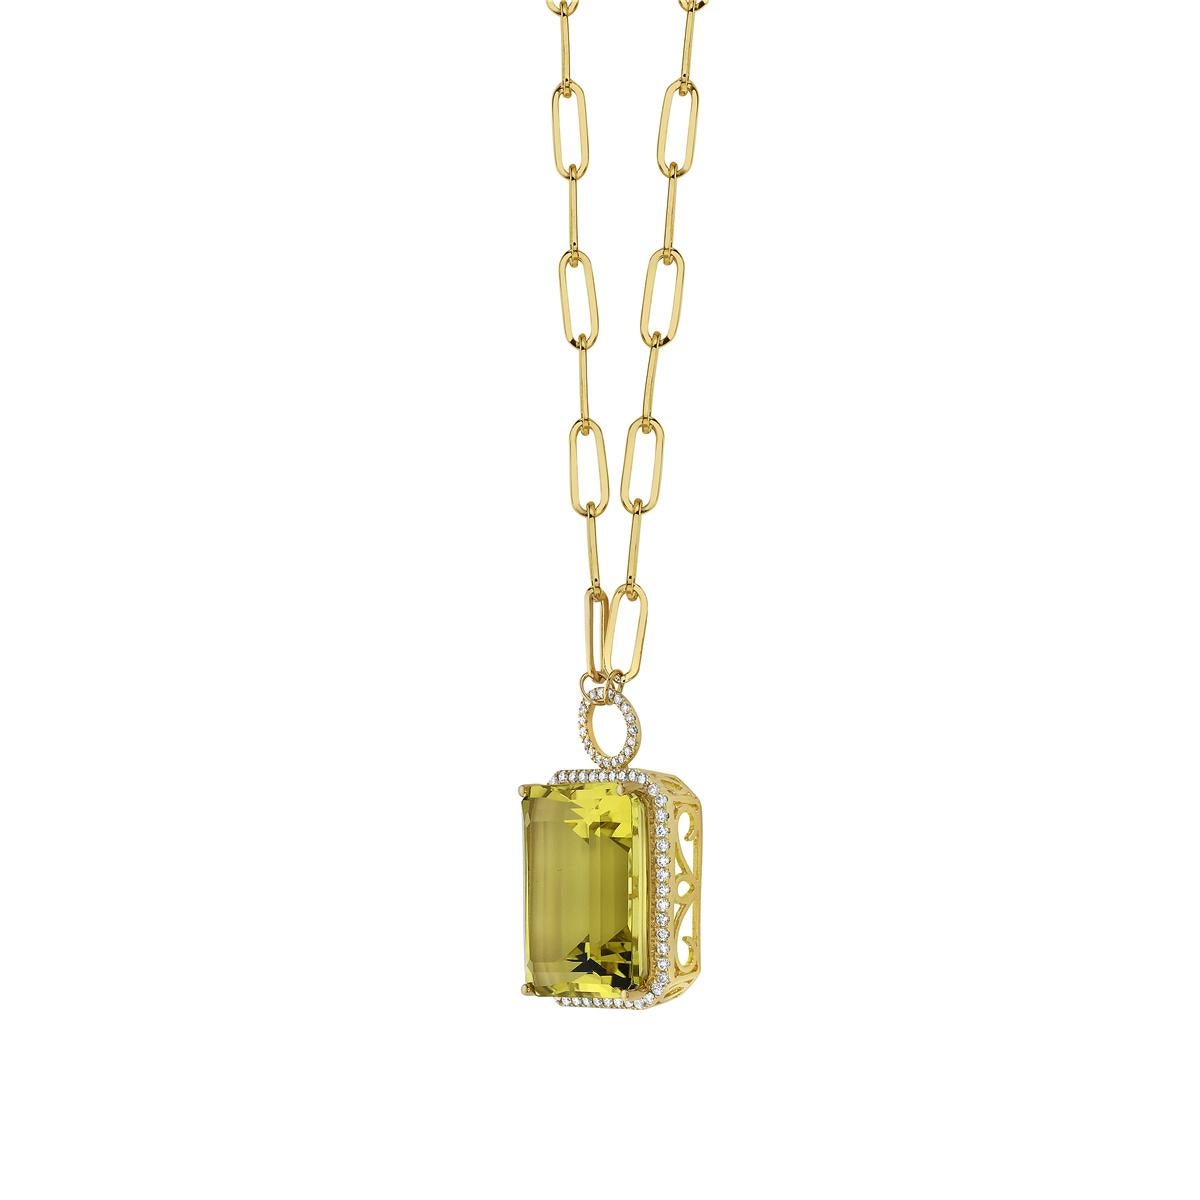 With this exquisite semi-precious gold-green quartz necklace, style and glamour are in the spotlight. This 14-karat emerald cut necklace is made from 3.5 grams of gold, 1 green quartz totaling 21.78 karats, and is surrounded by 69 SI1-SI2, GH color